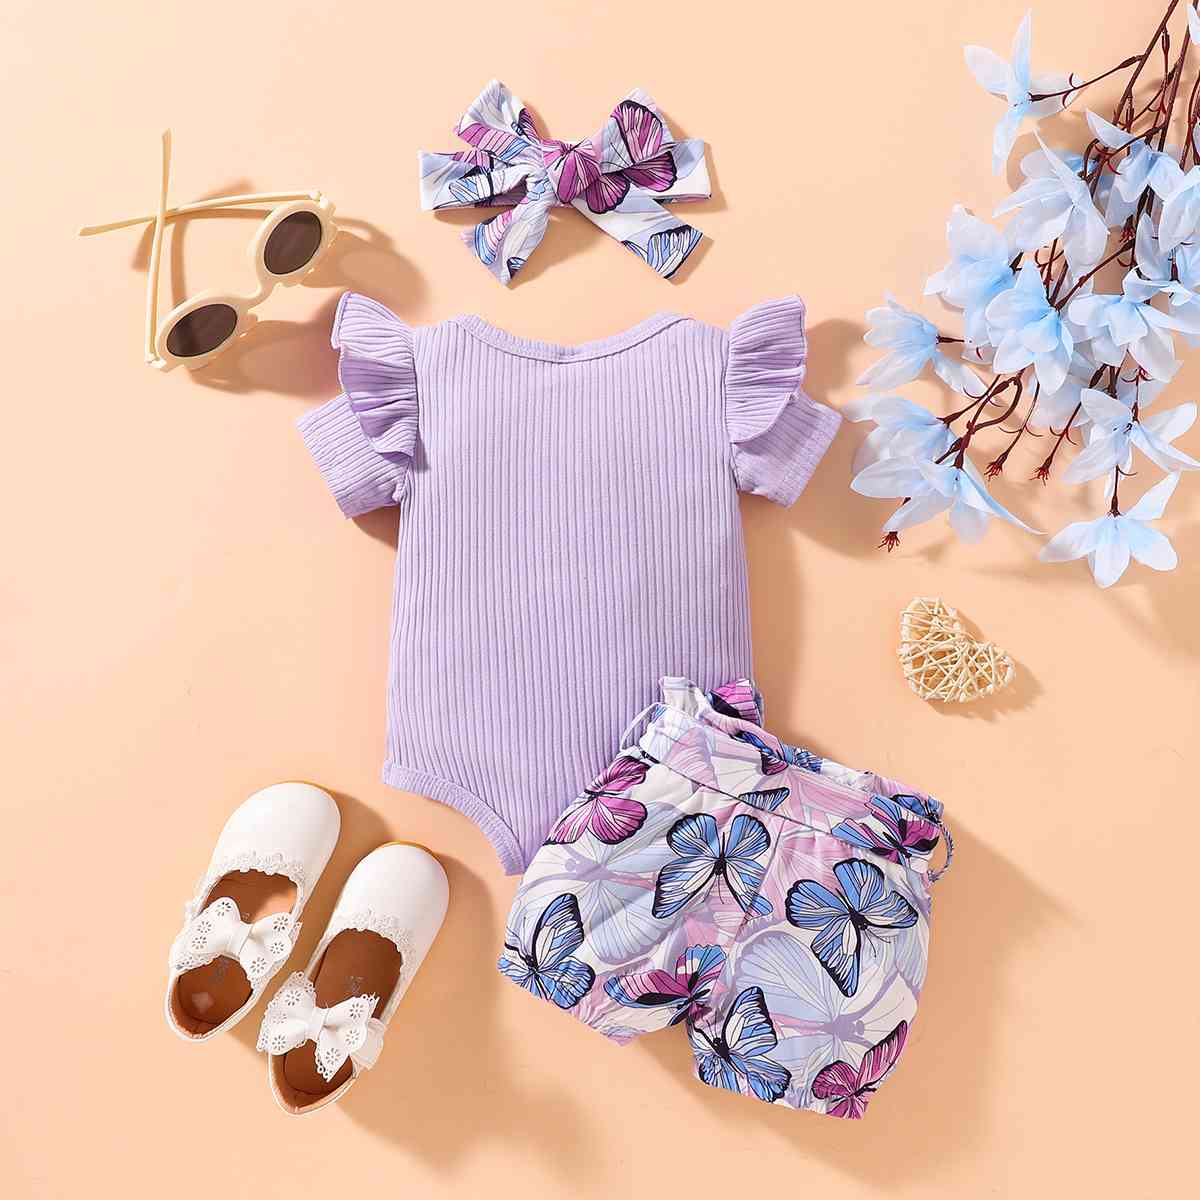 Ribbed Ruffle Shoulder Bodysuit and Butterfly Print Shorts Set | M.Q,Ship From Overseas